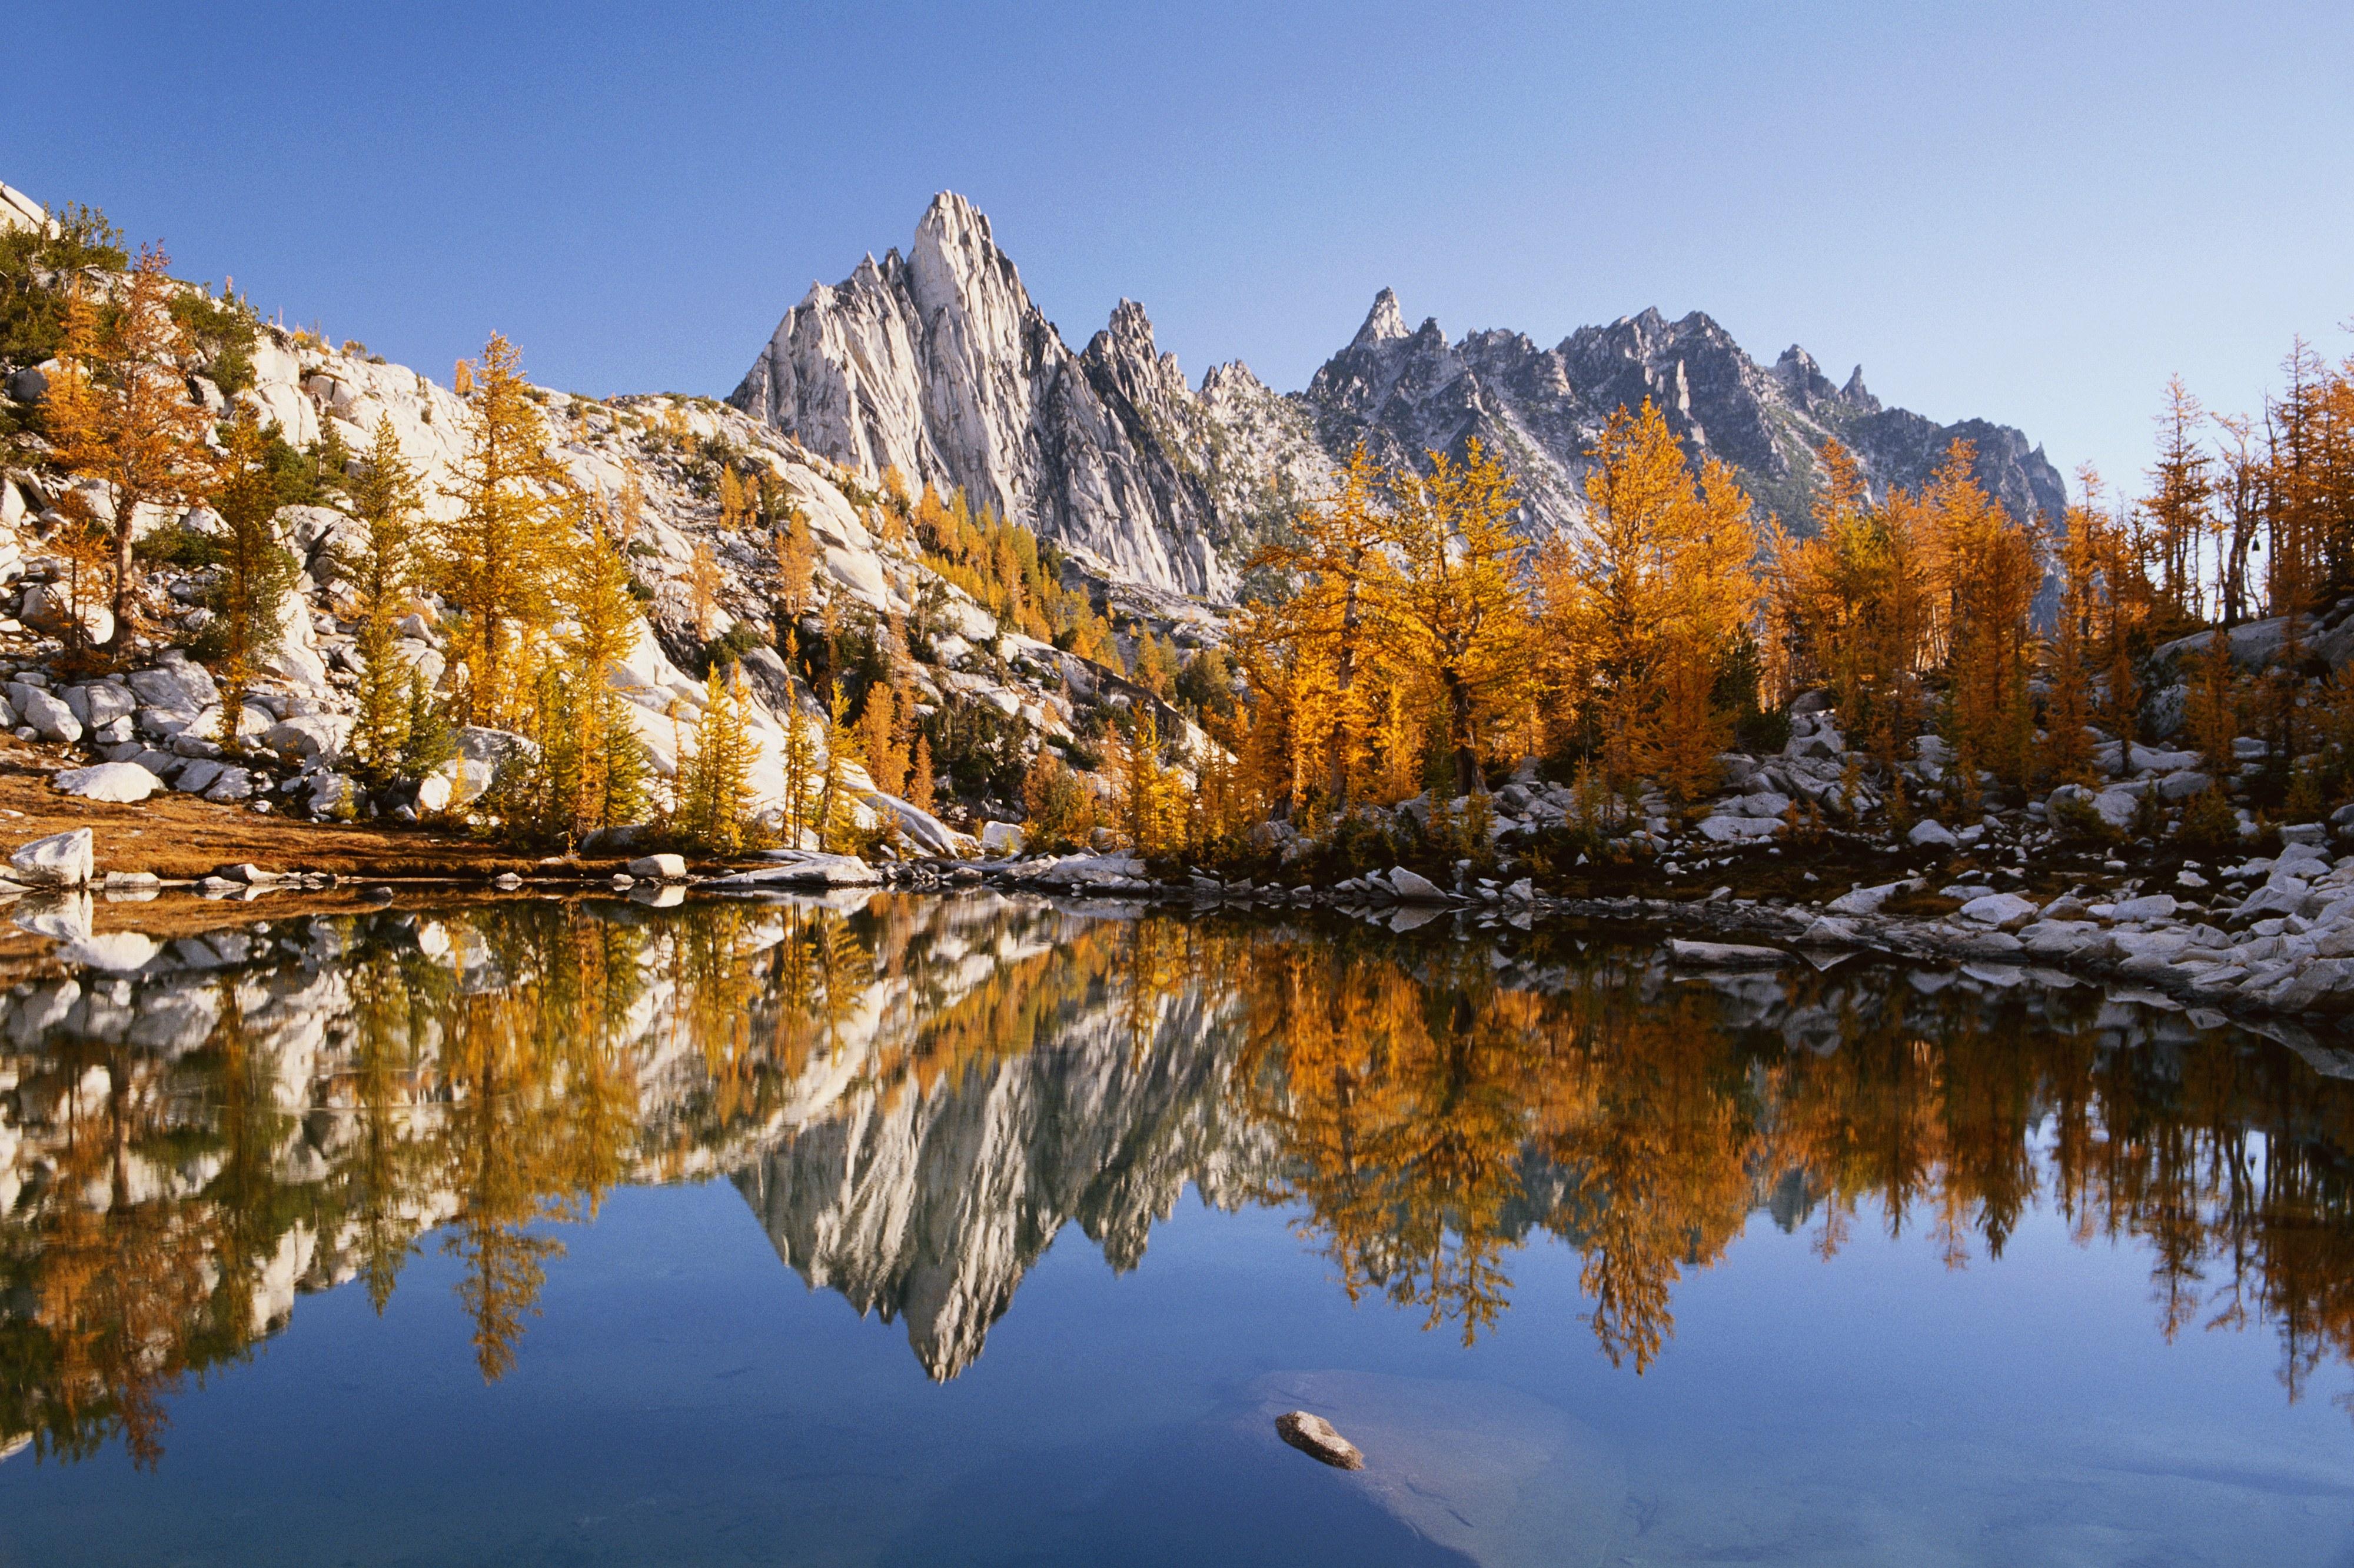 Best Fall Hiking Trails: Our Favorite Fall Hikes in